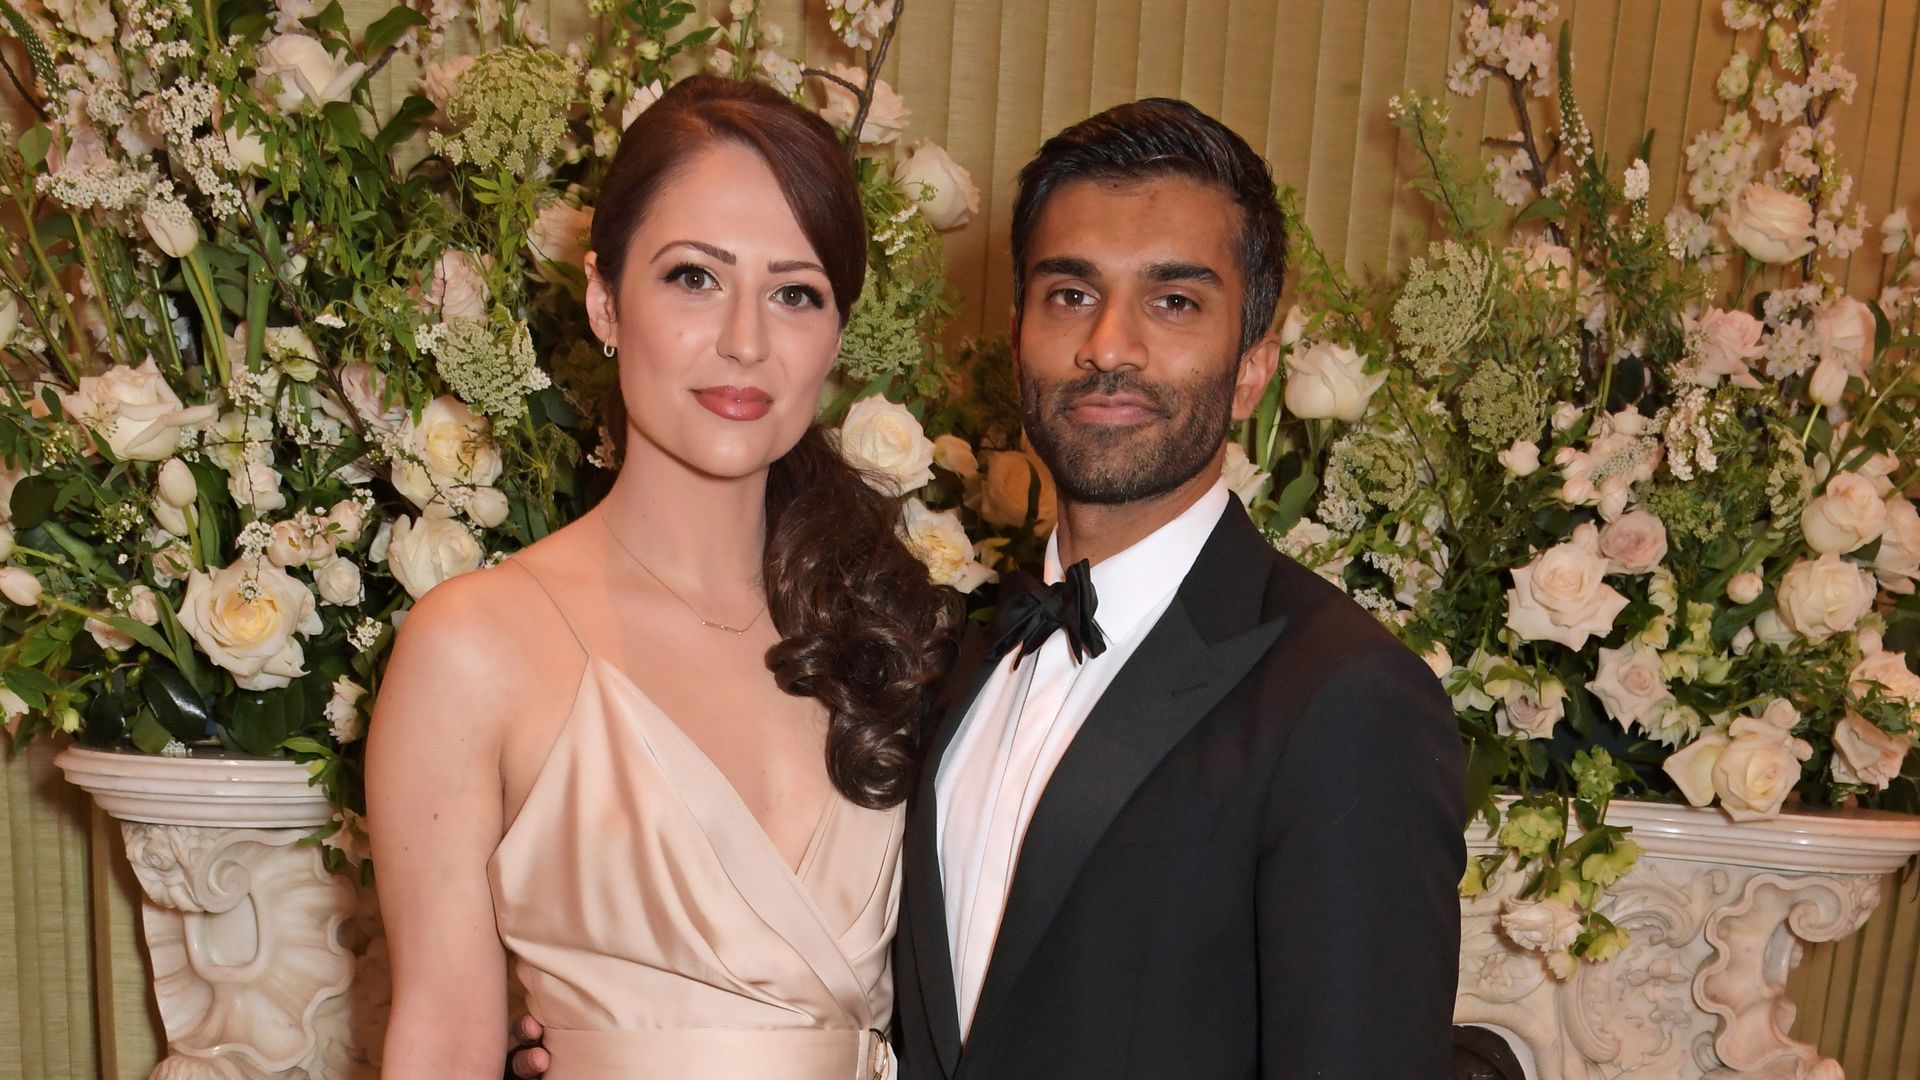 Nicola Thorp and Nikesh Patel attend the British Vogue and Tiffany & Co. Fashion and Film Party 2022